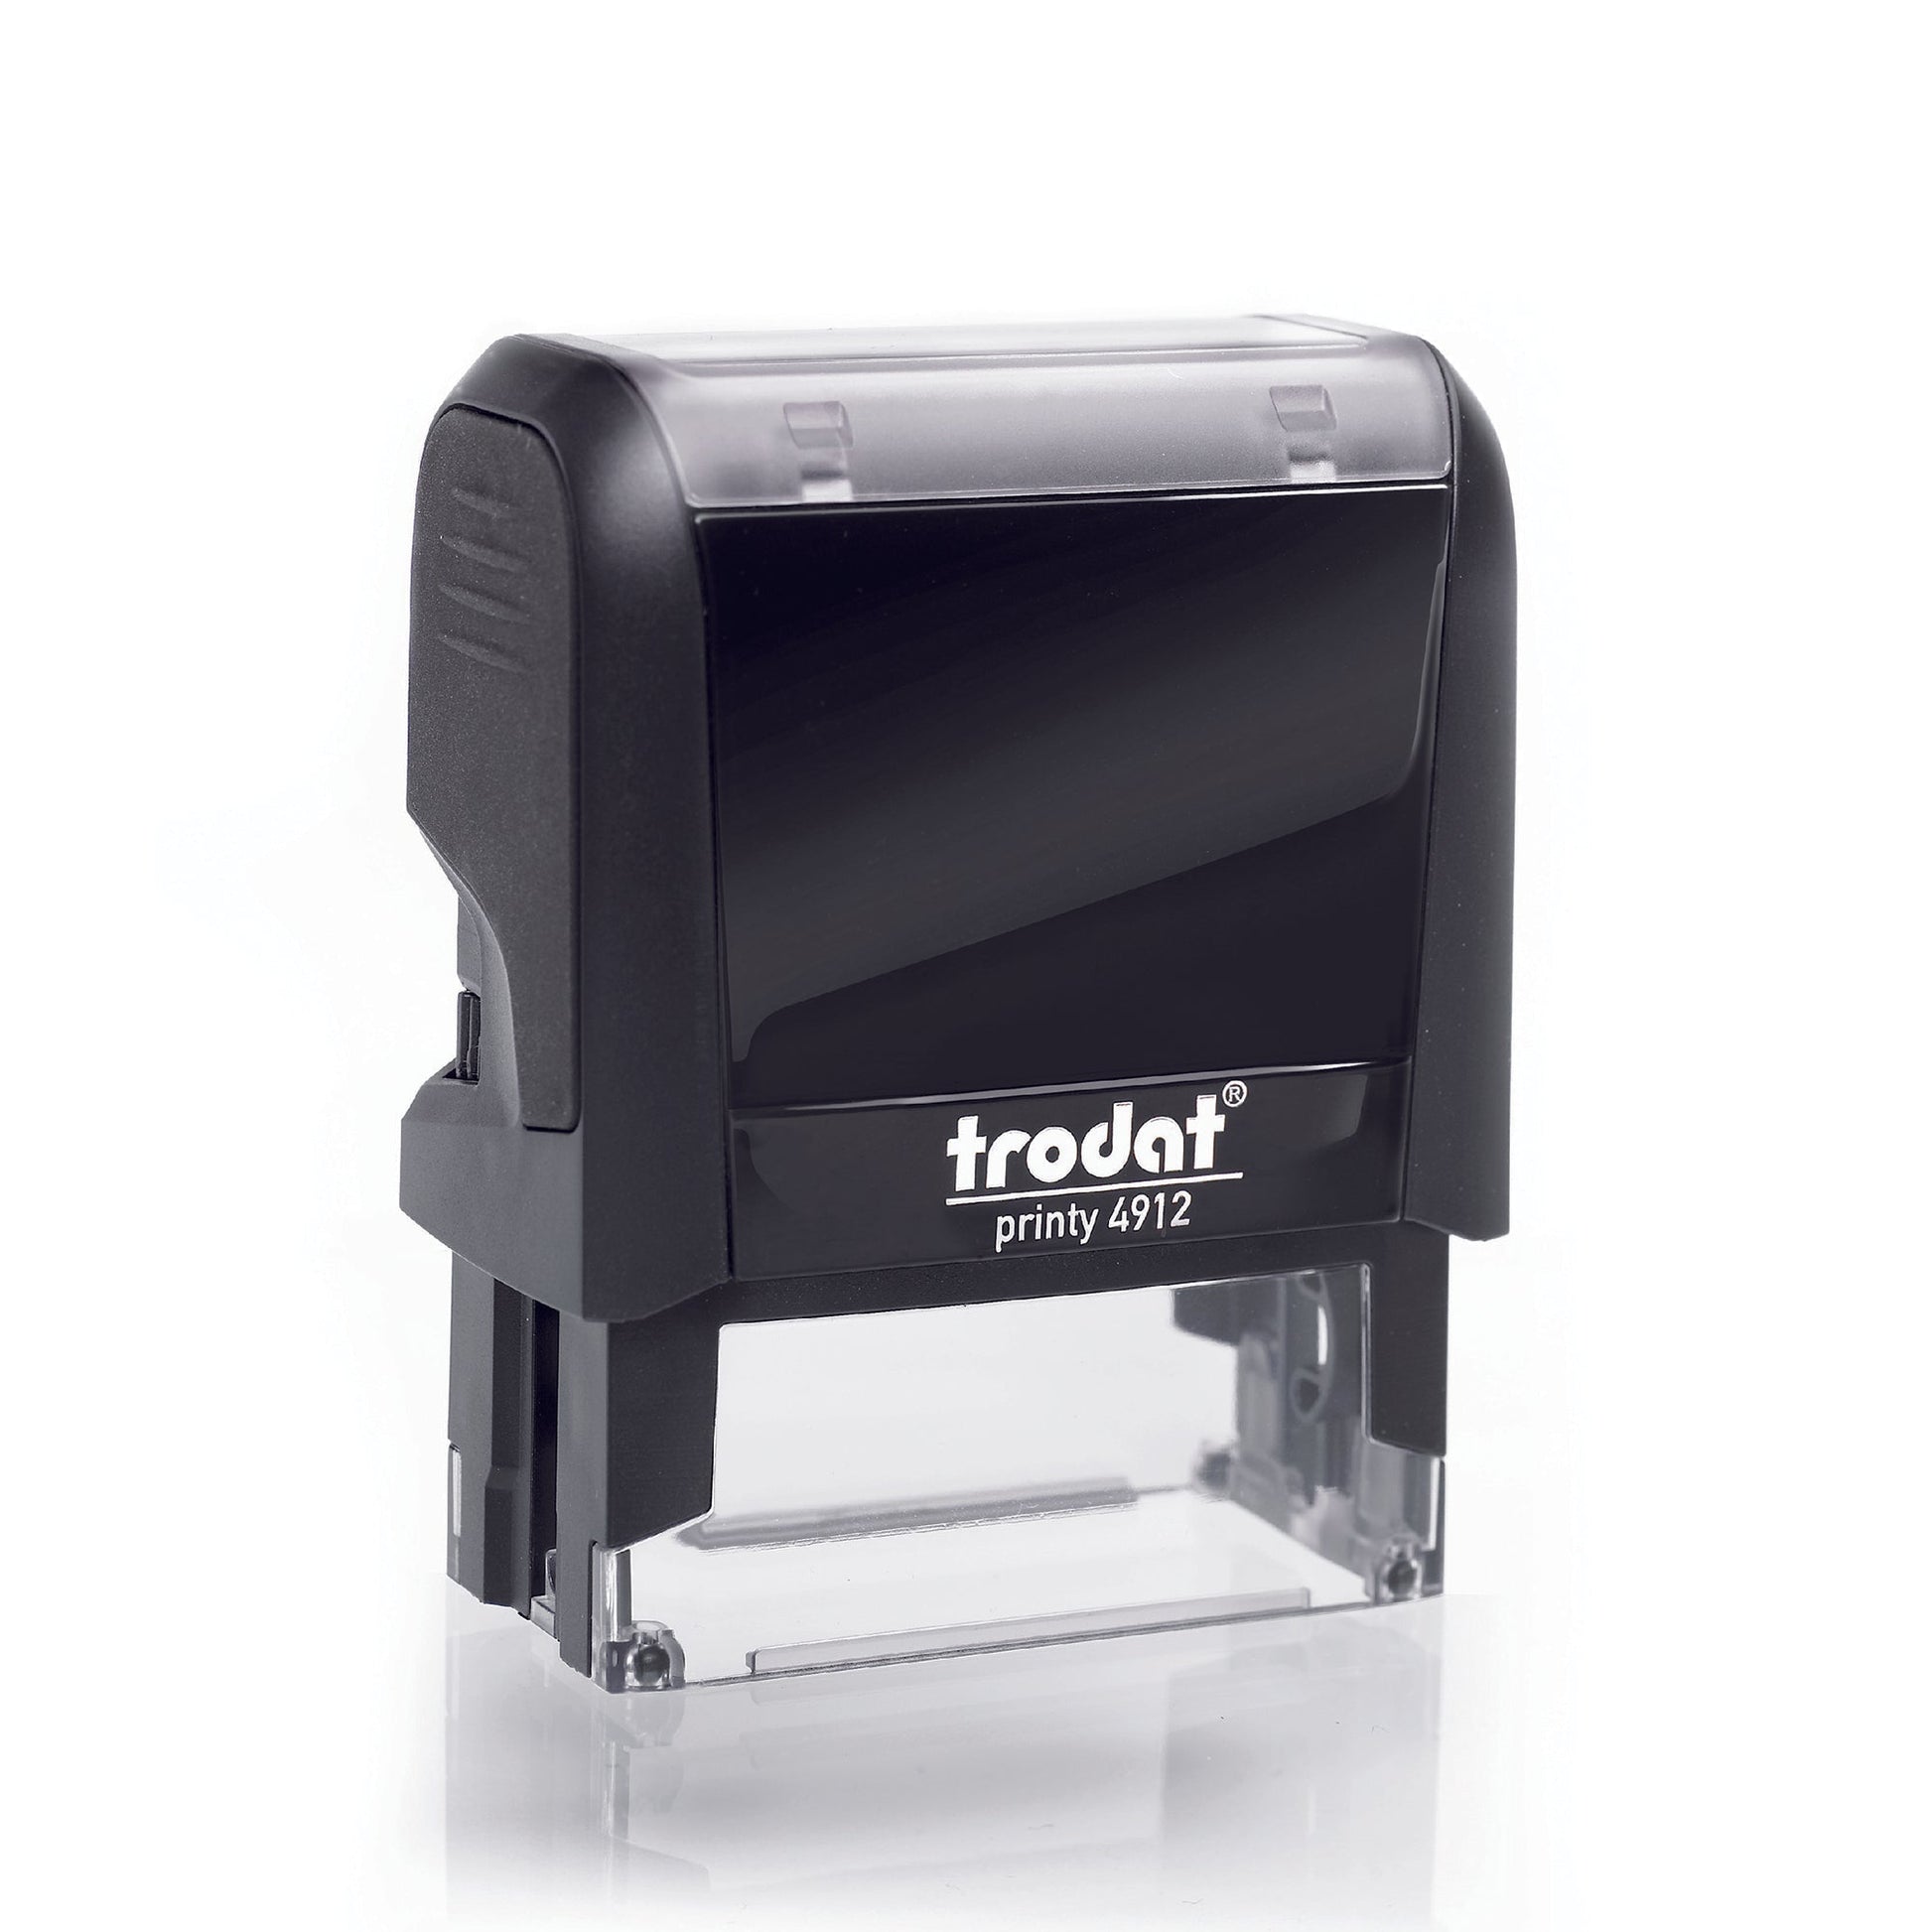 Copy For Your Records - Border - Rubber Stamp - Trodat 4912 - 47mm x 18mm Impression